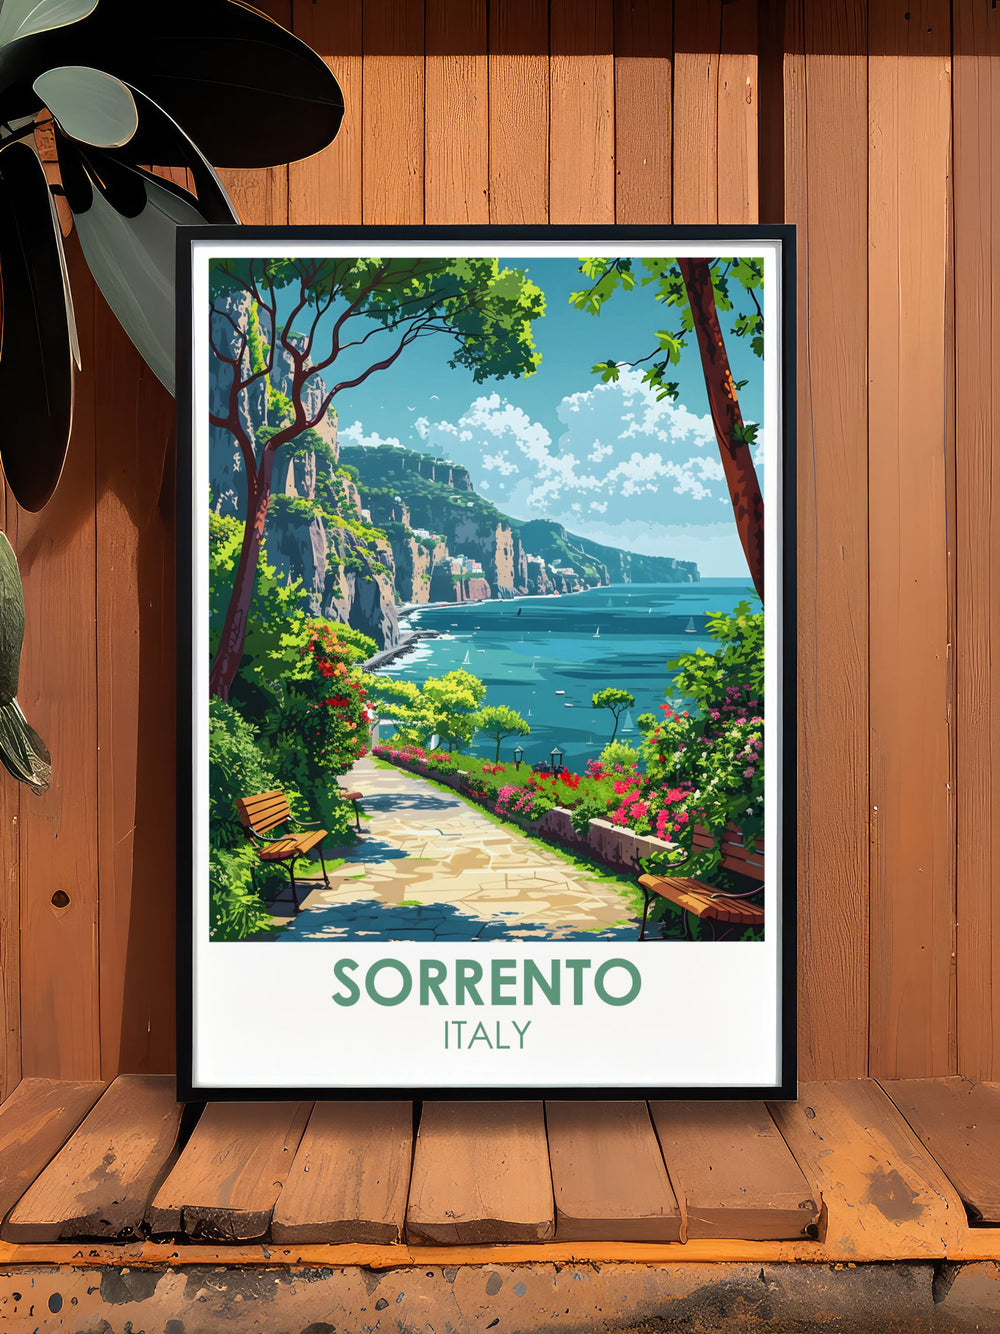 Italy wall art showcasing Villa Comunale Park in Sorrento with vibrant flora and picturesque pathways. This Sorrento art print brings the tranquility of Italy into your home adding a touch of elegance and culture perfect for living room or bedroom decor.